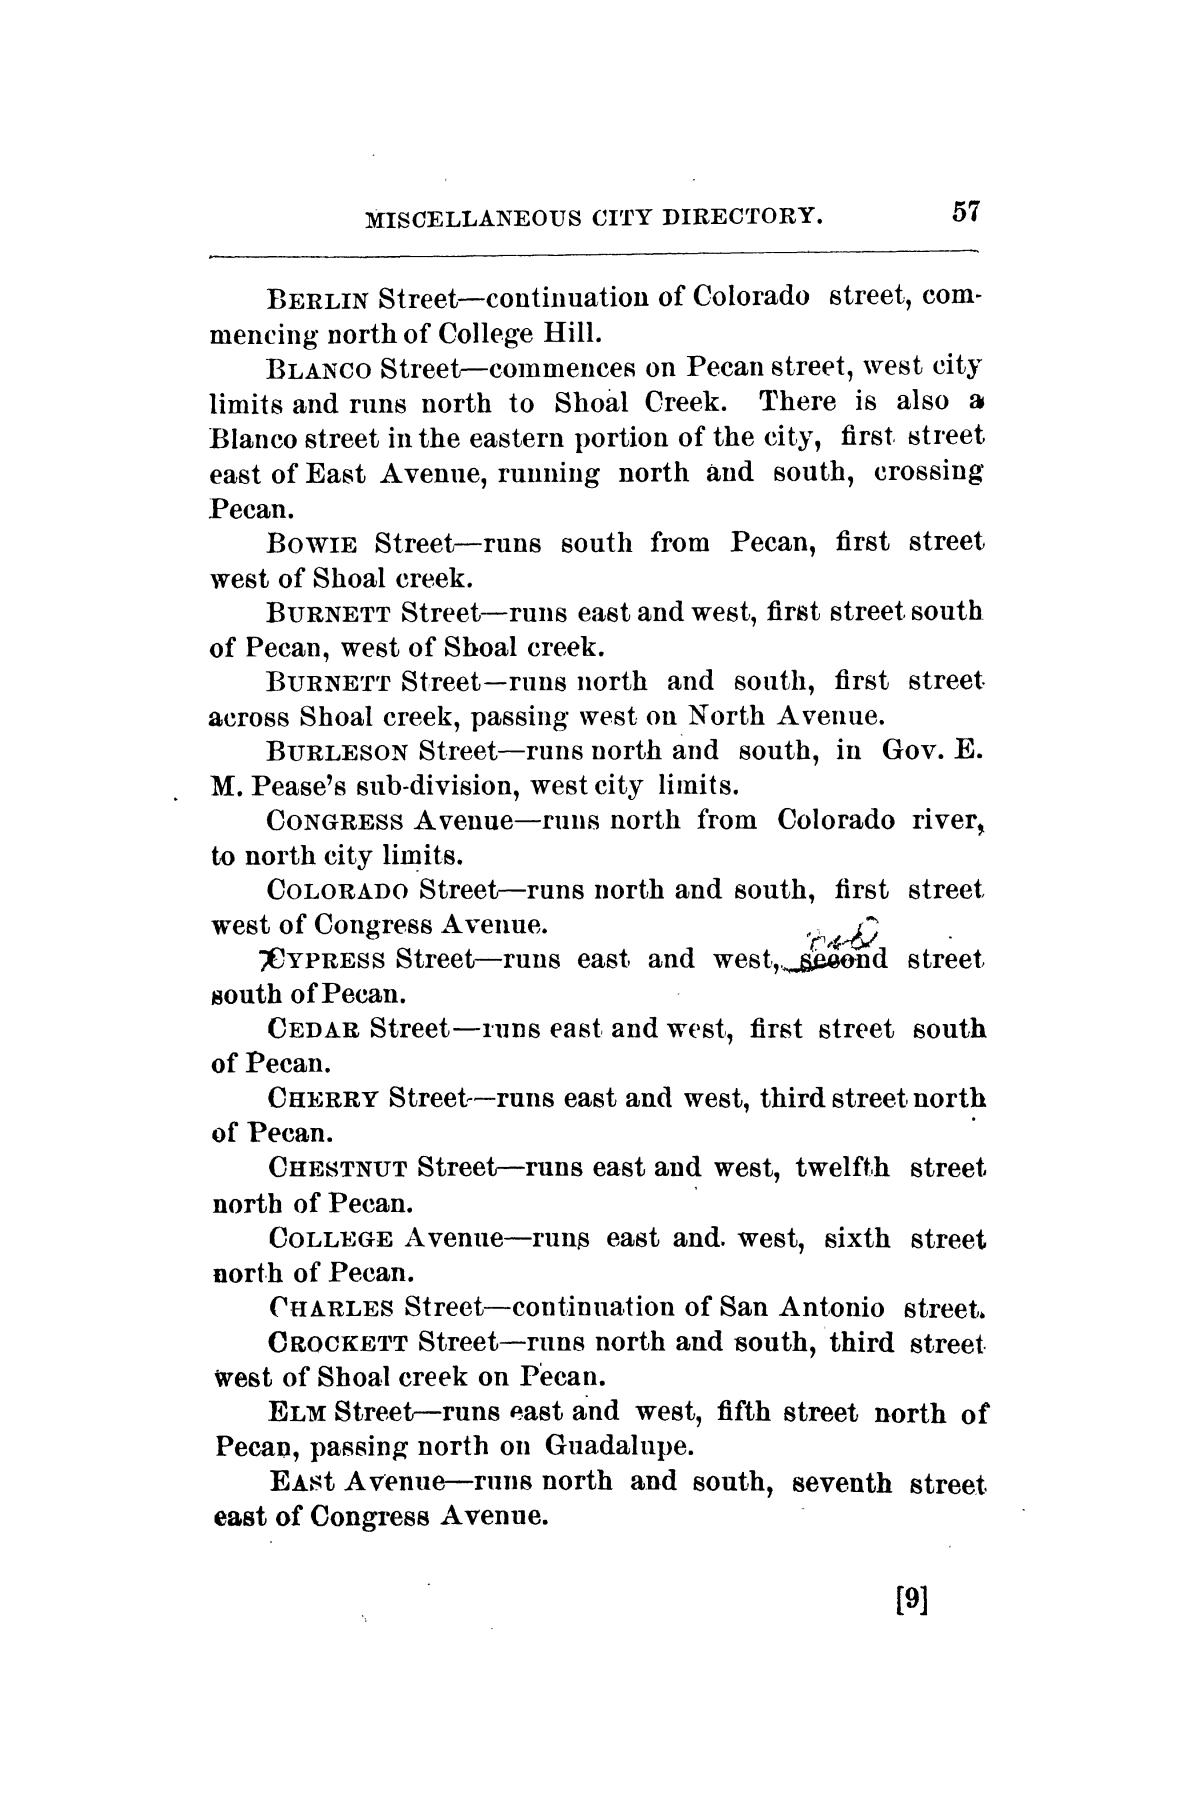 Mooney & Morrison's General Directory Of The City Of Austin, Texas, For 1877-78.
                                                
                                                    57
                                                